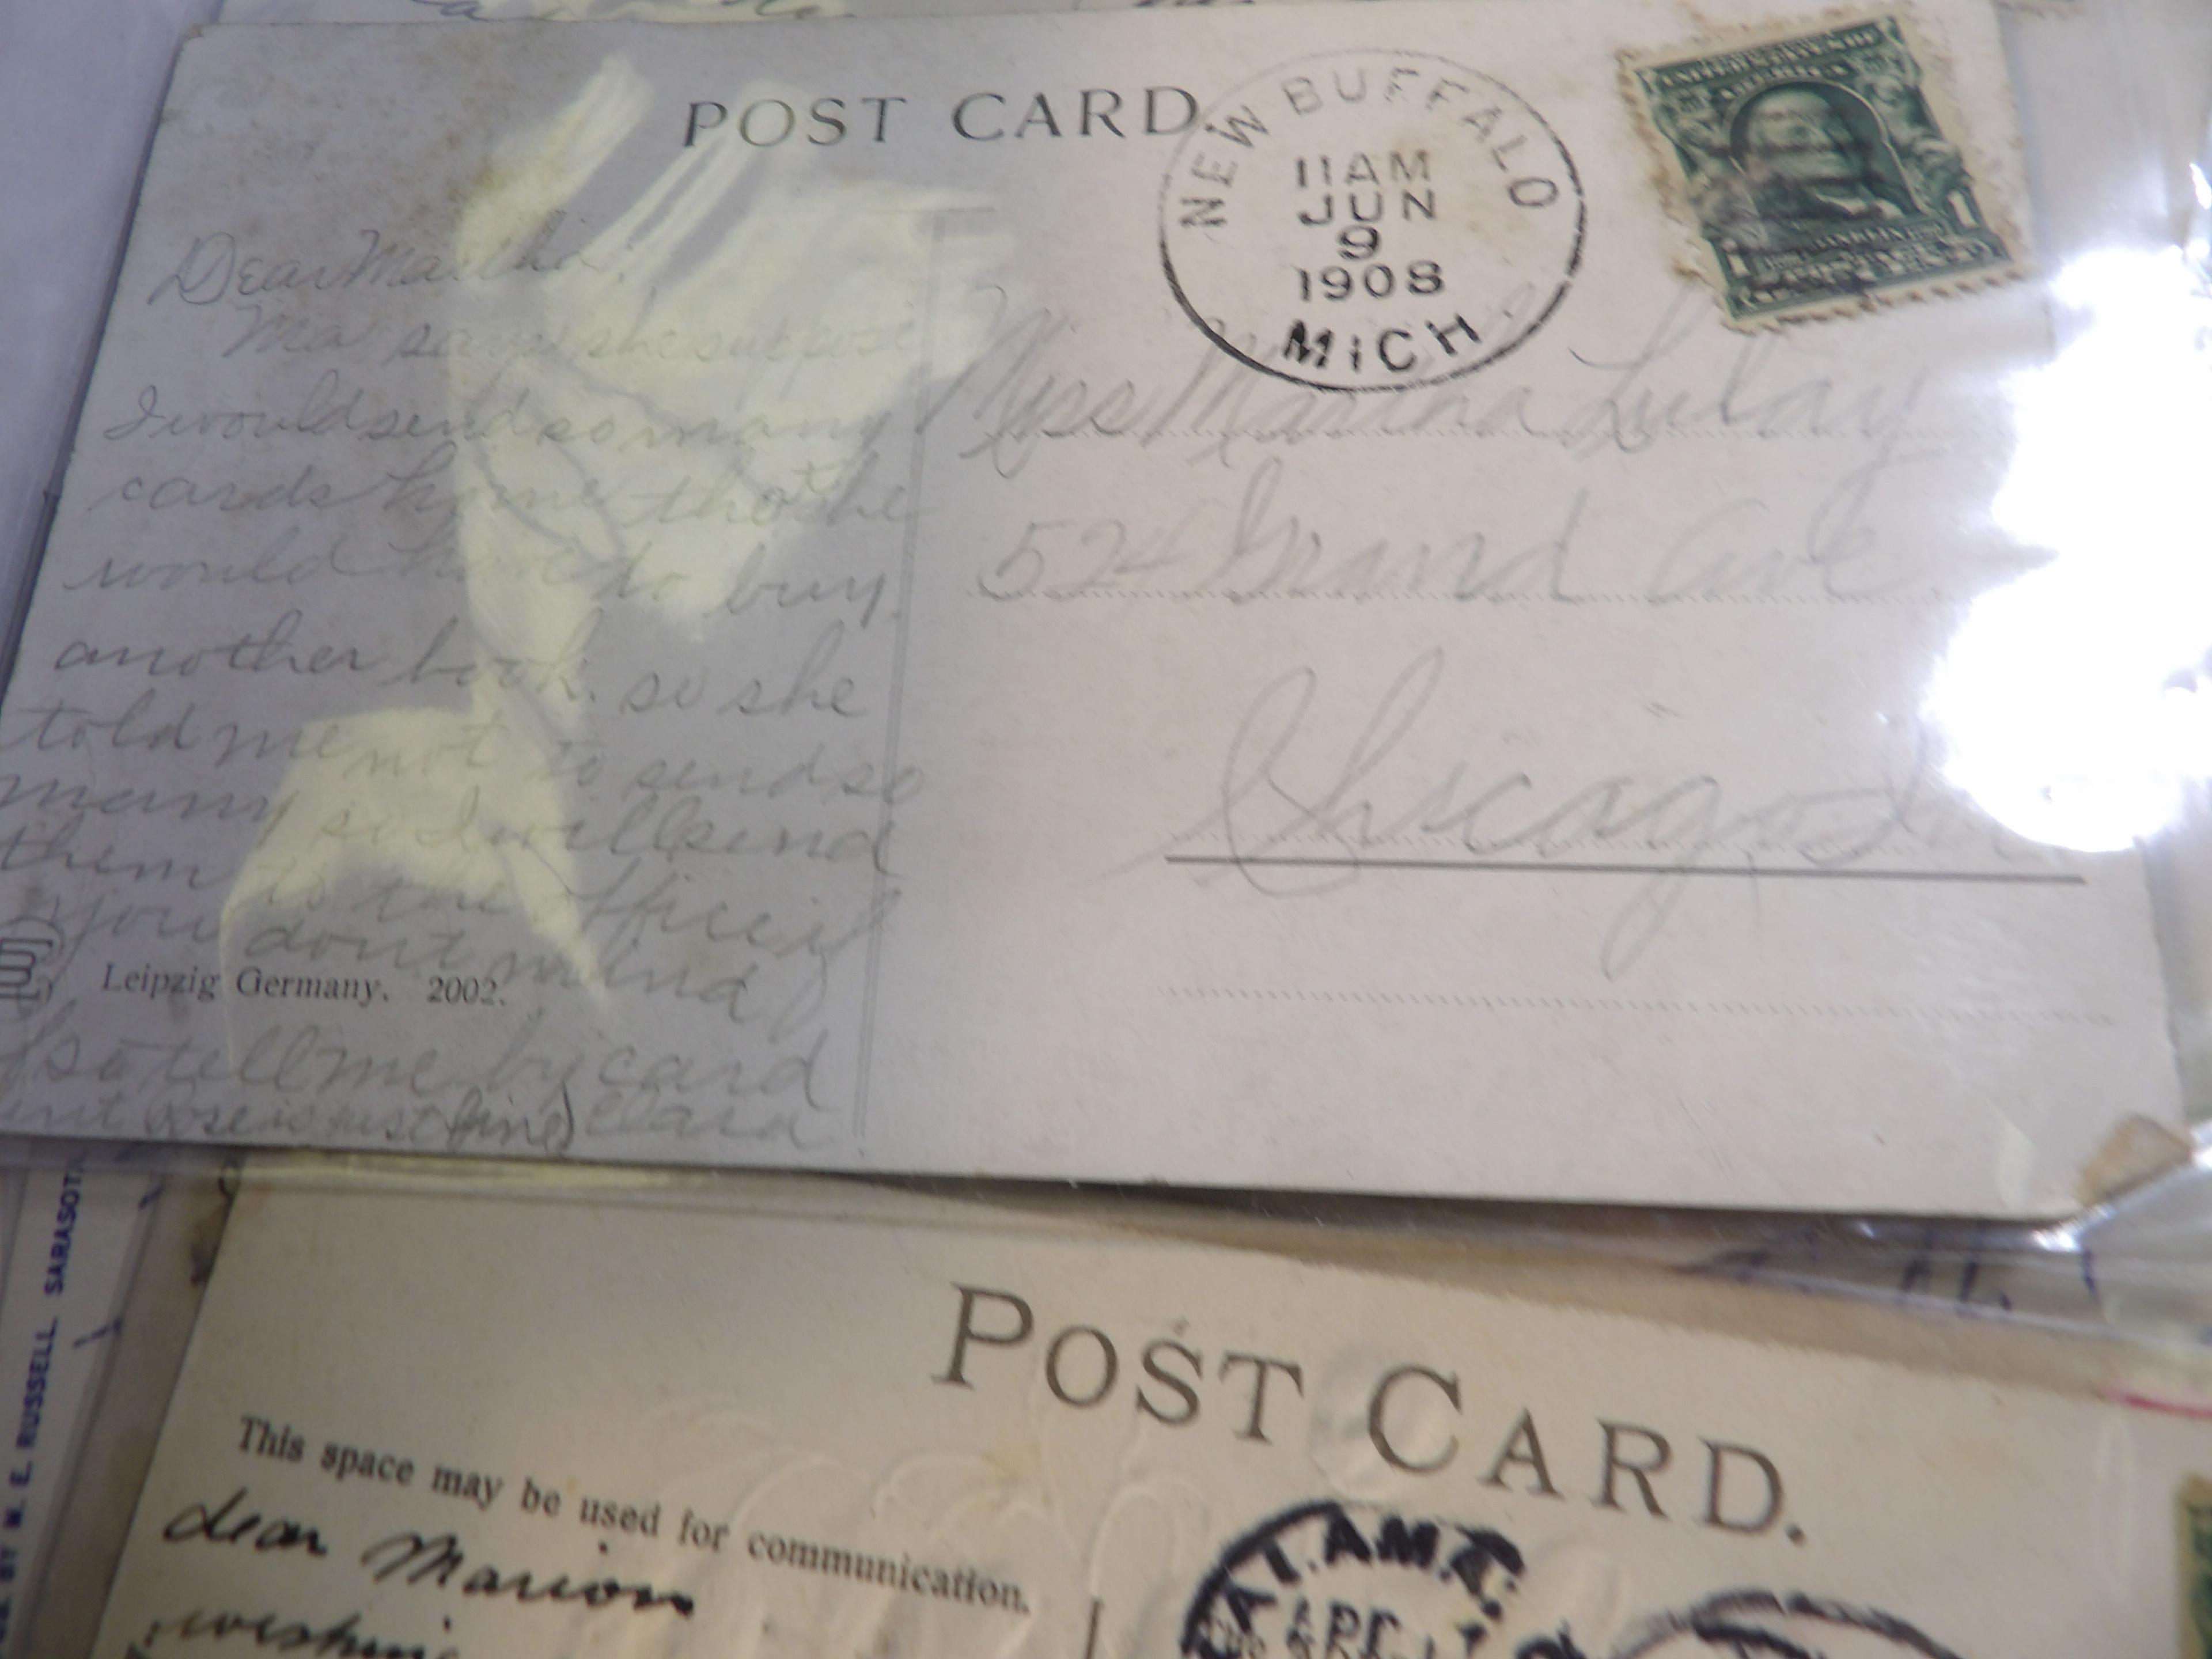 Approximately 900 Old Post Cards in a Postal Card box. Many have interesting Post Marks and cancelle